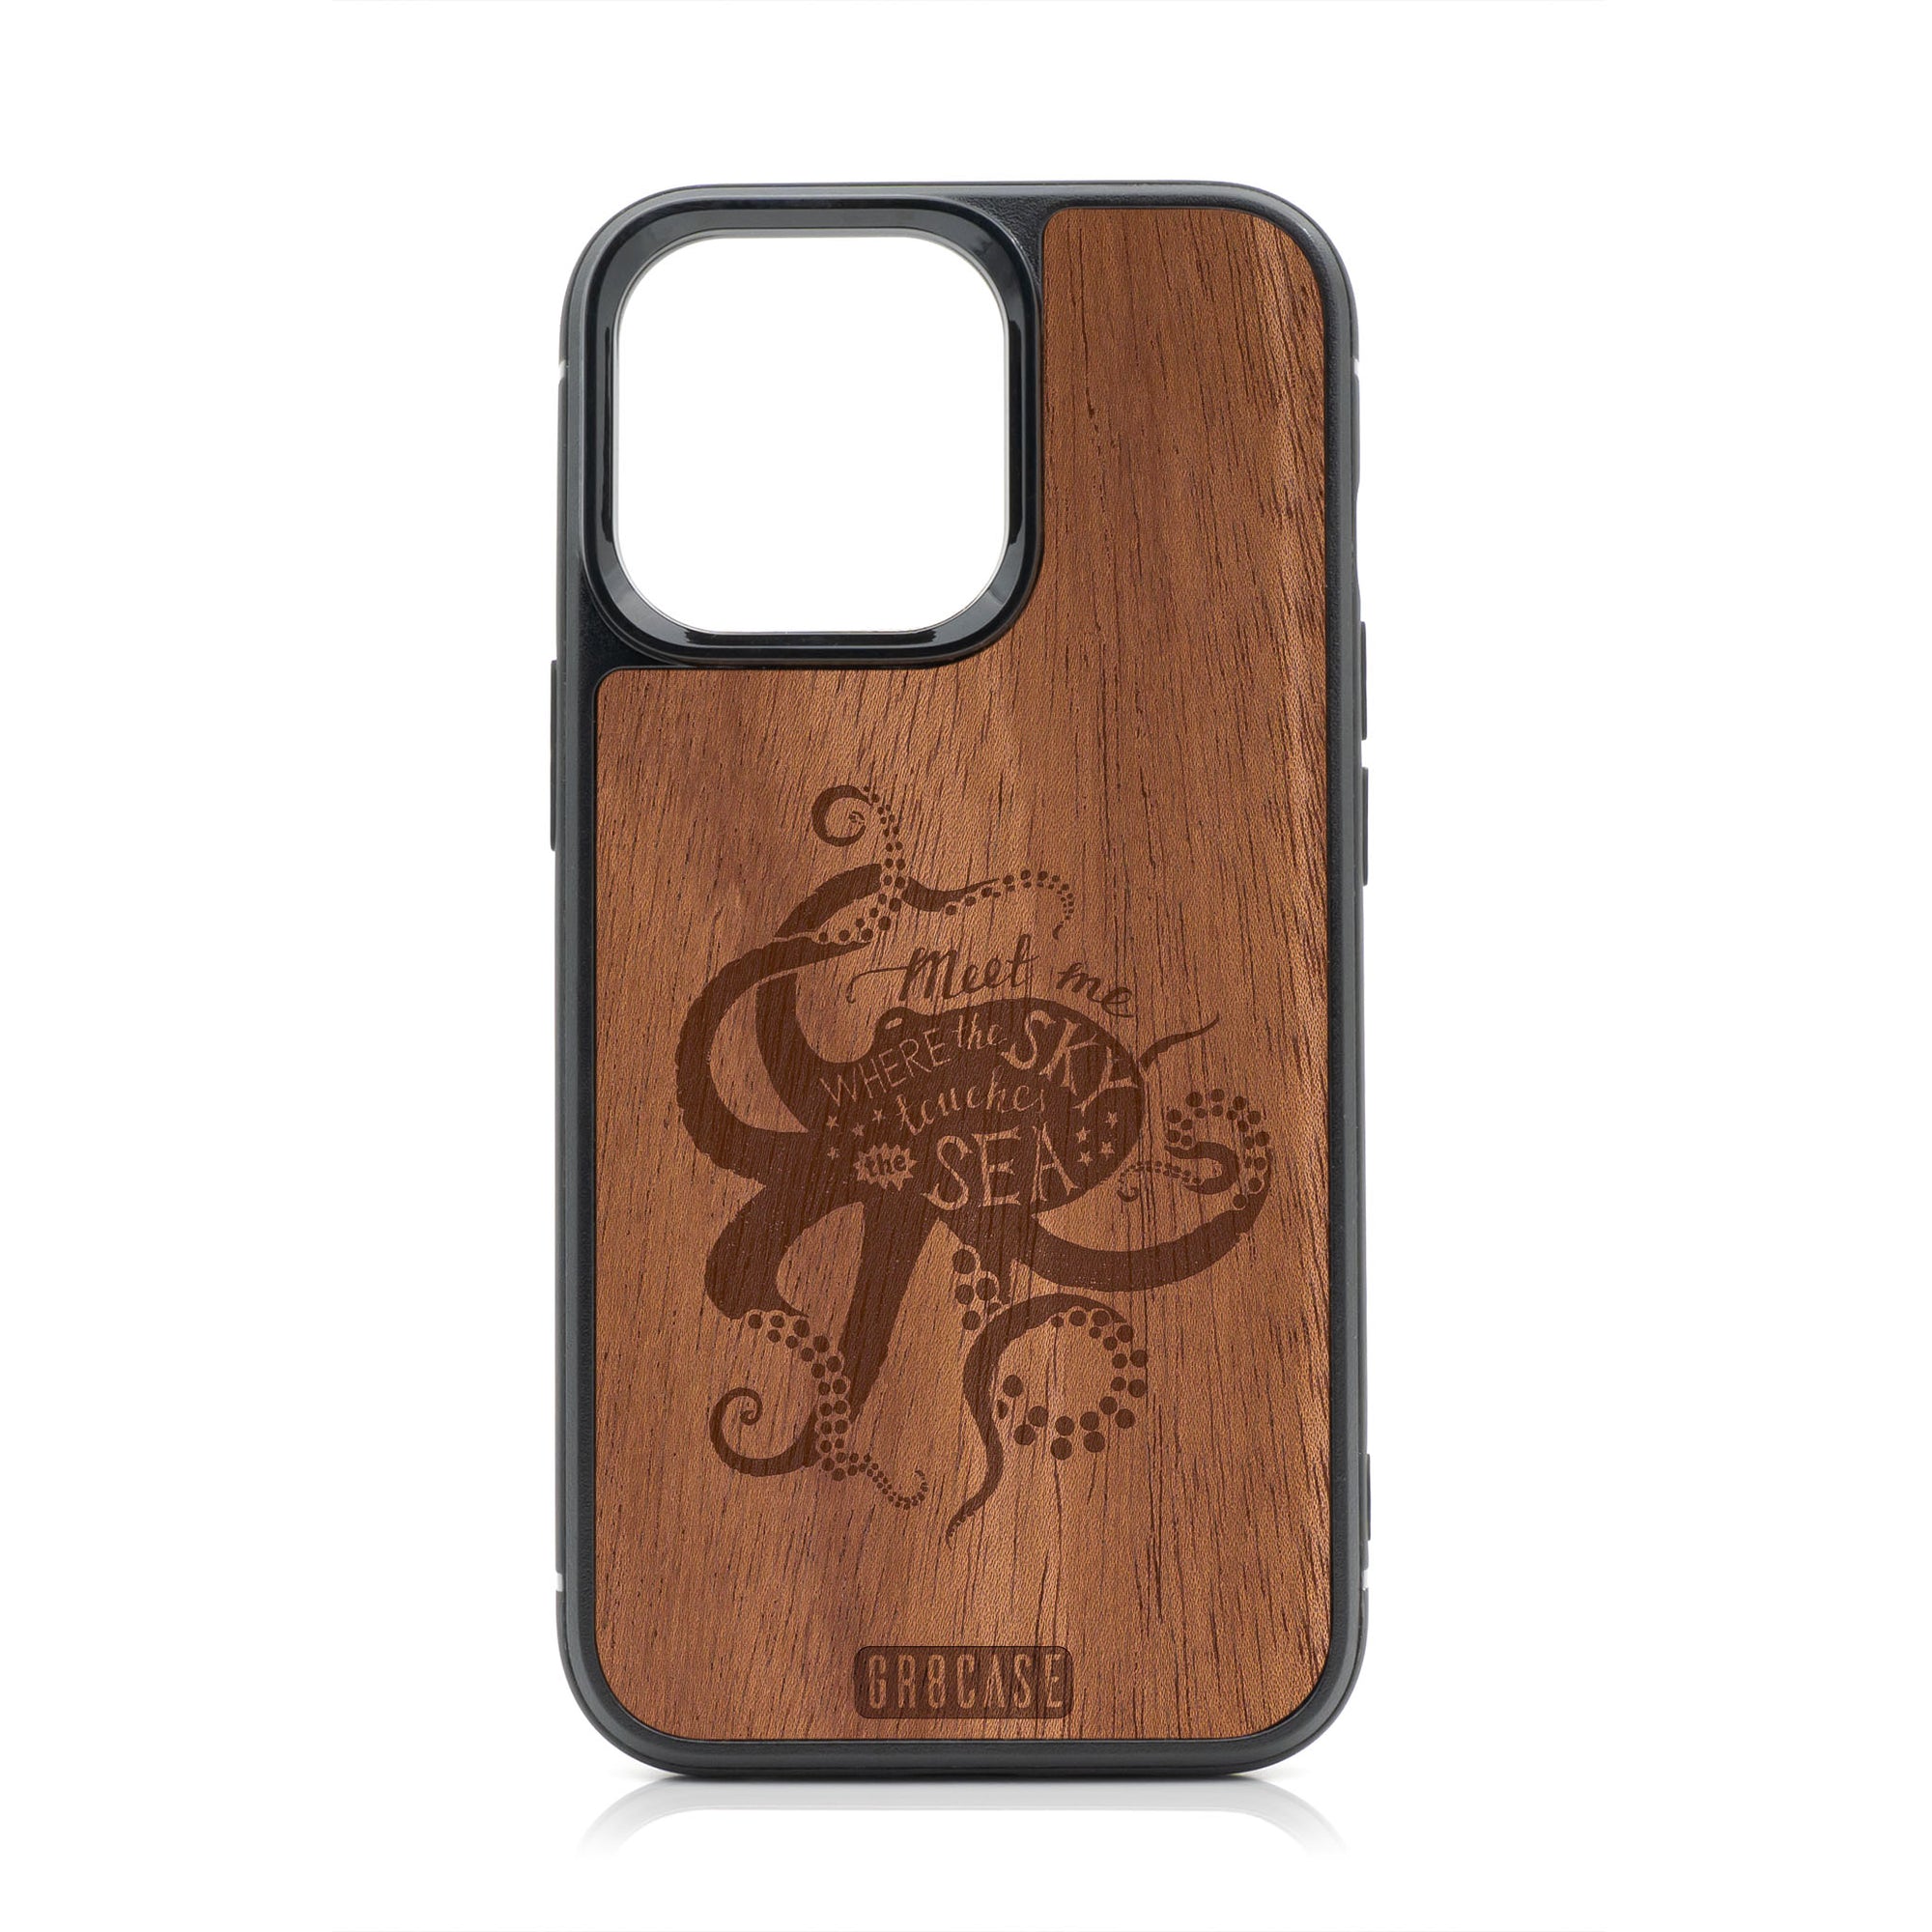 Meet Me Where The Sky Touches The Sea (Octopus) Design Wood Case For iPhone 13 Pro